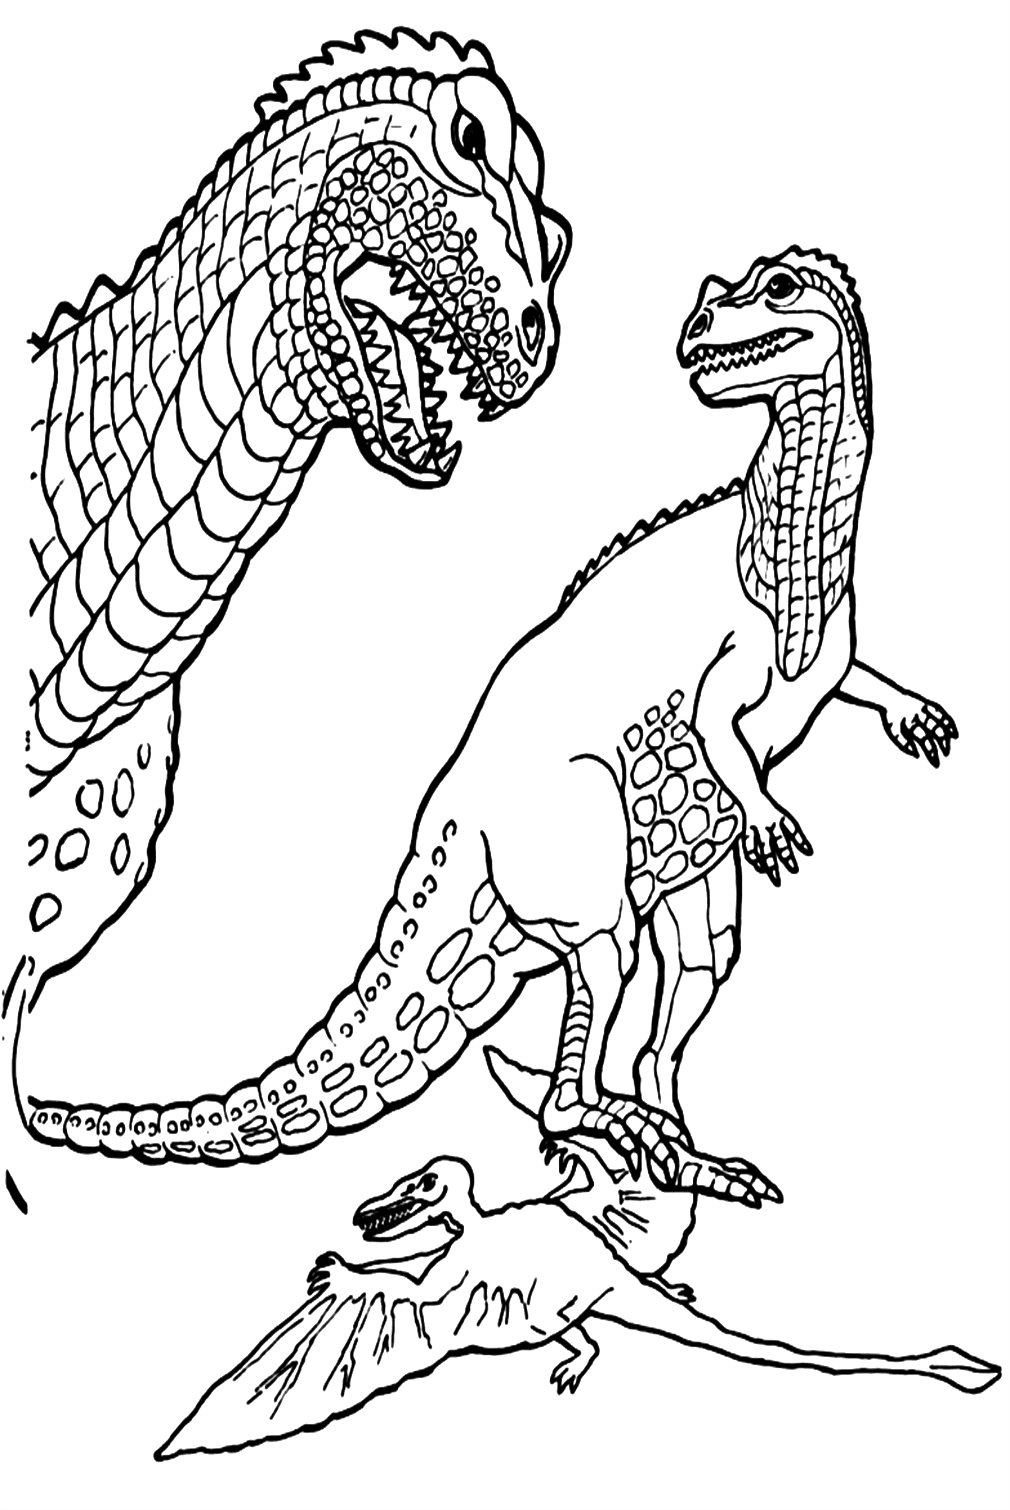 Jurassic World Coloring Coloring Pages